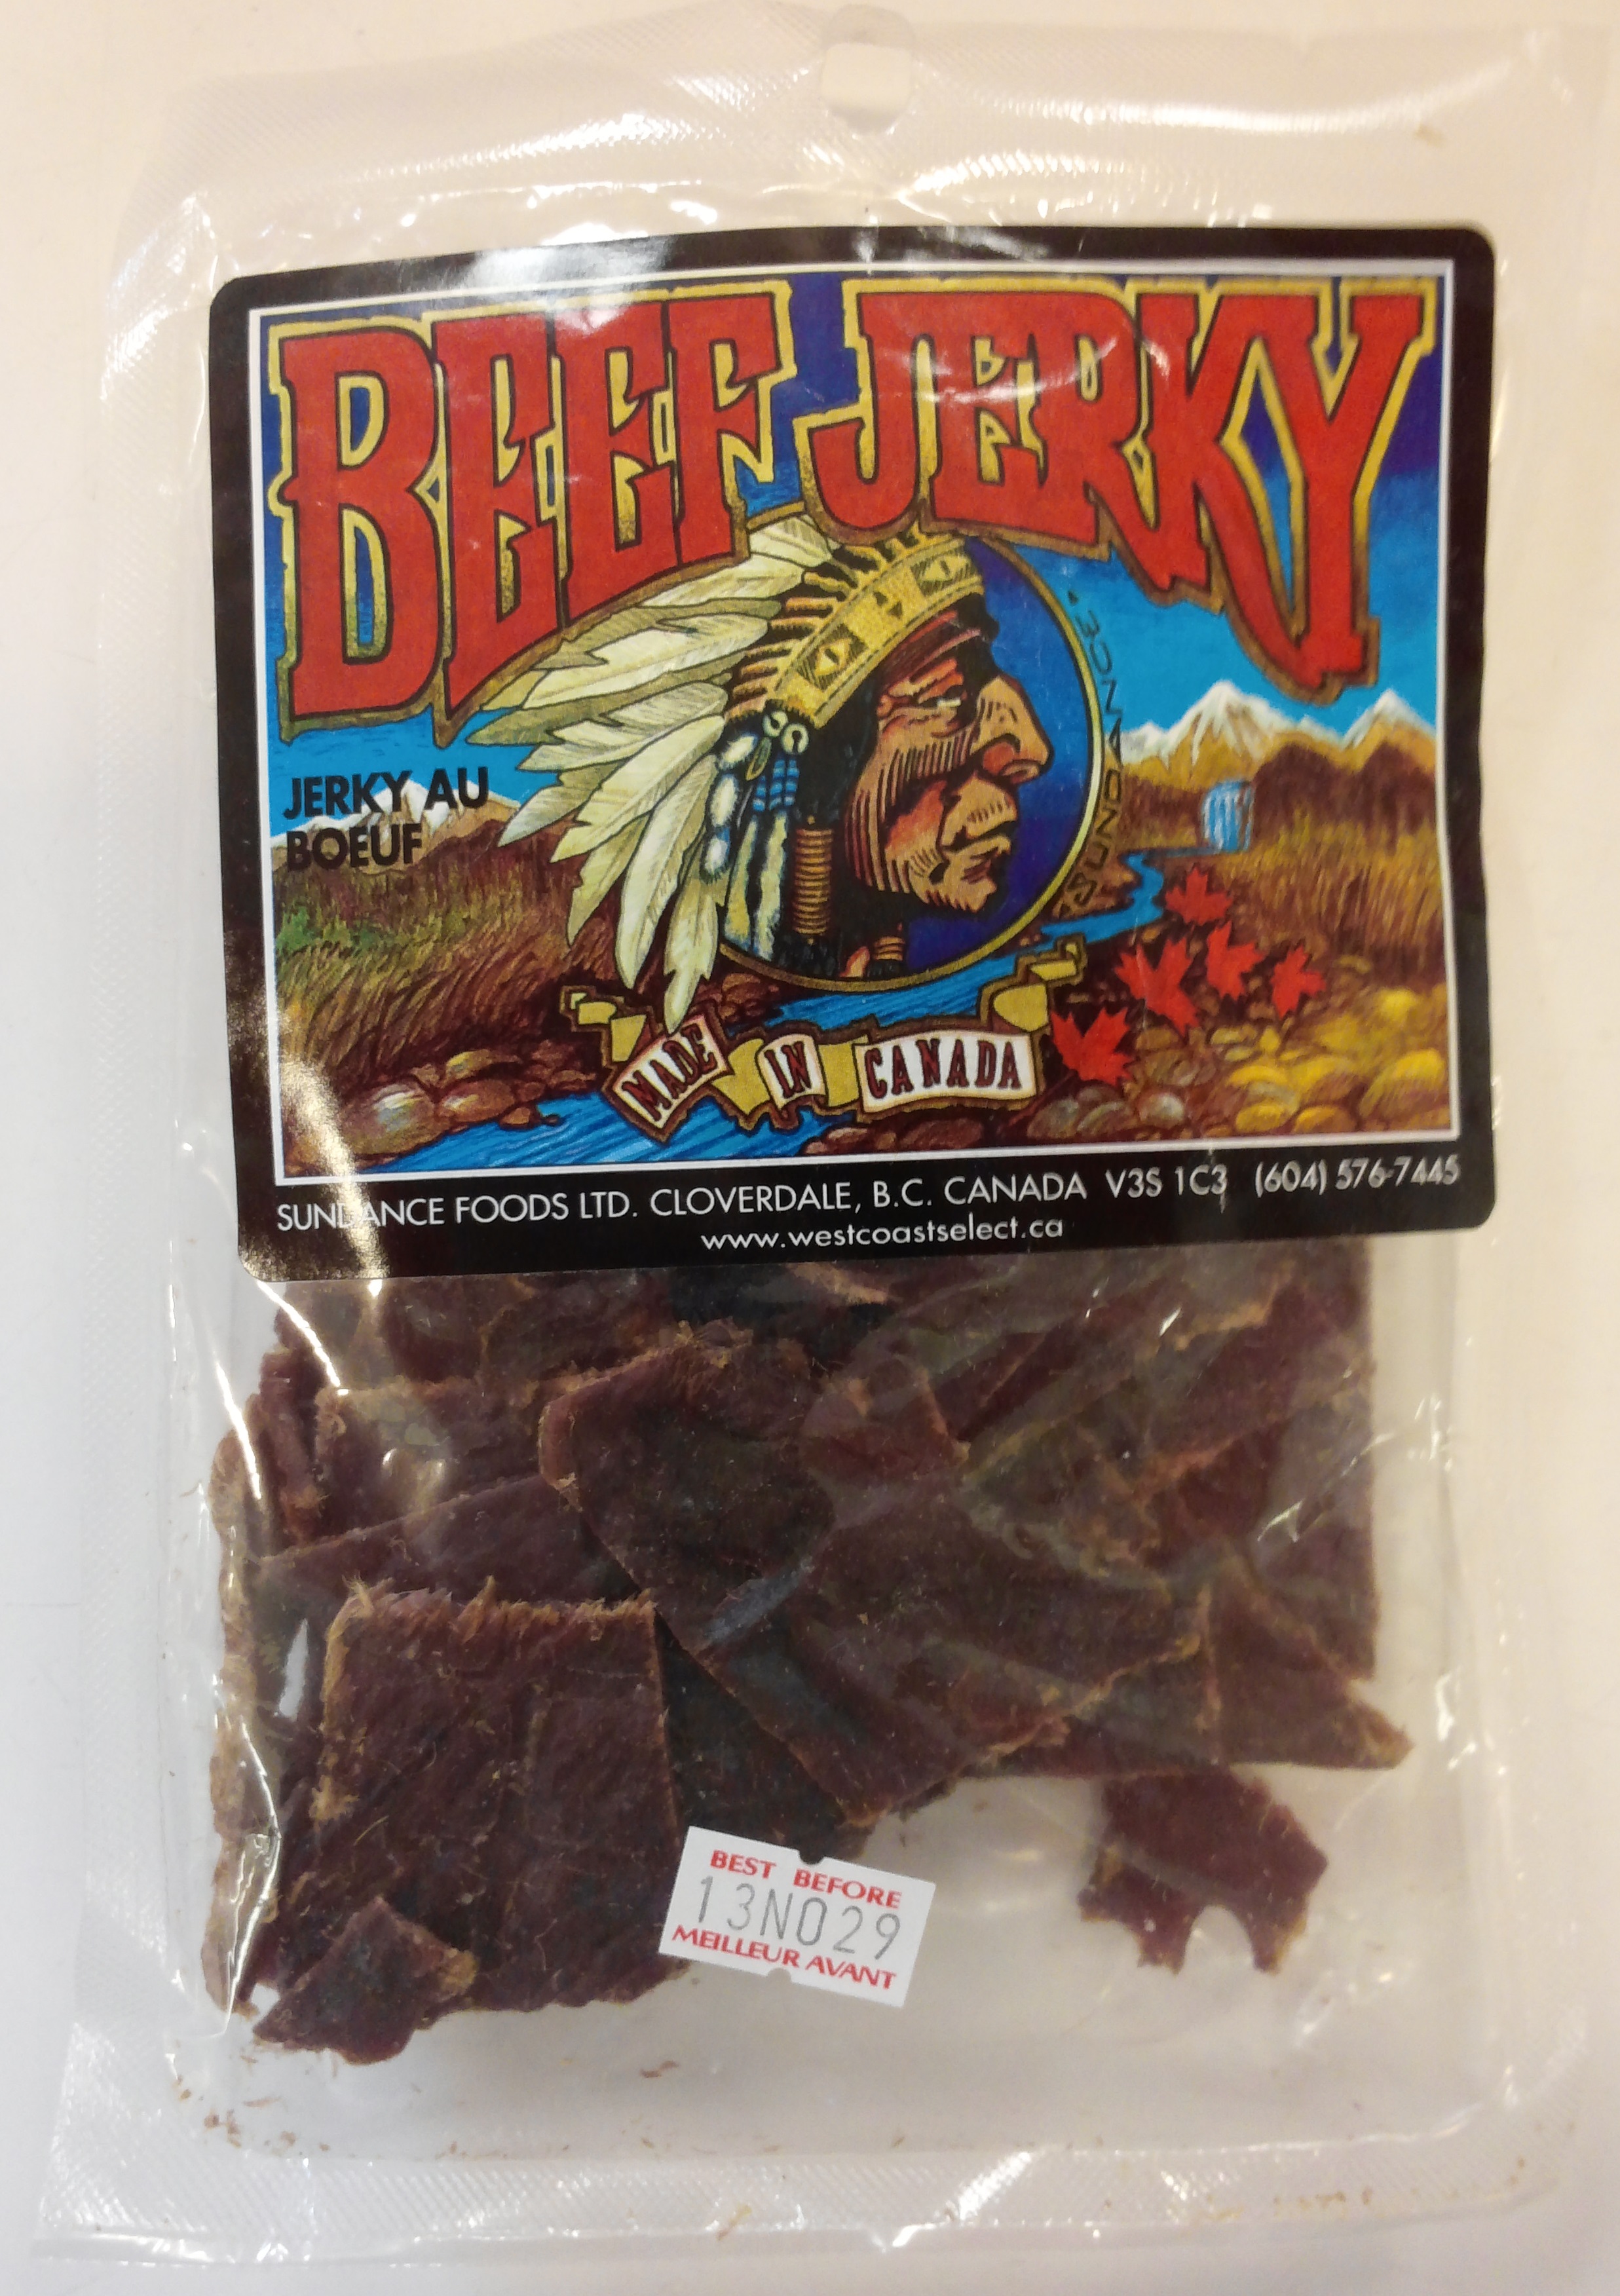 West Cost Select Beef Jerky